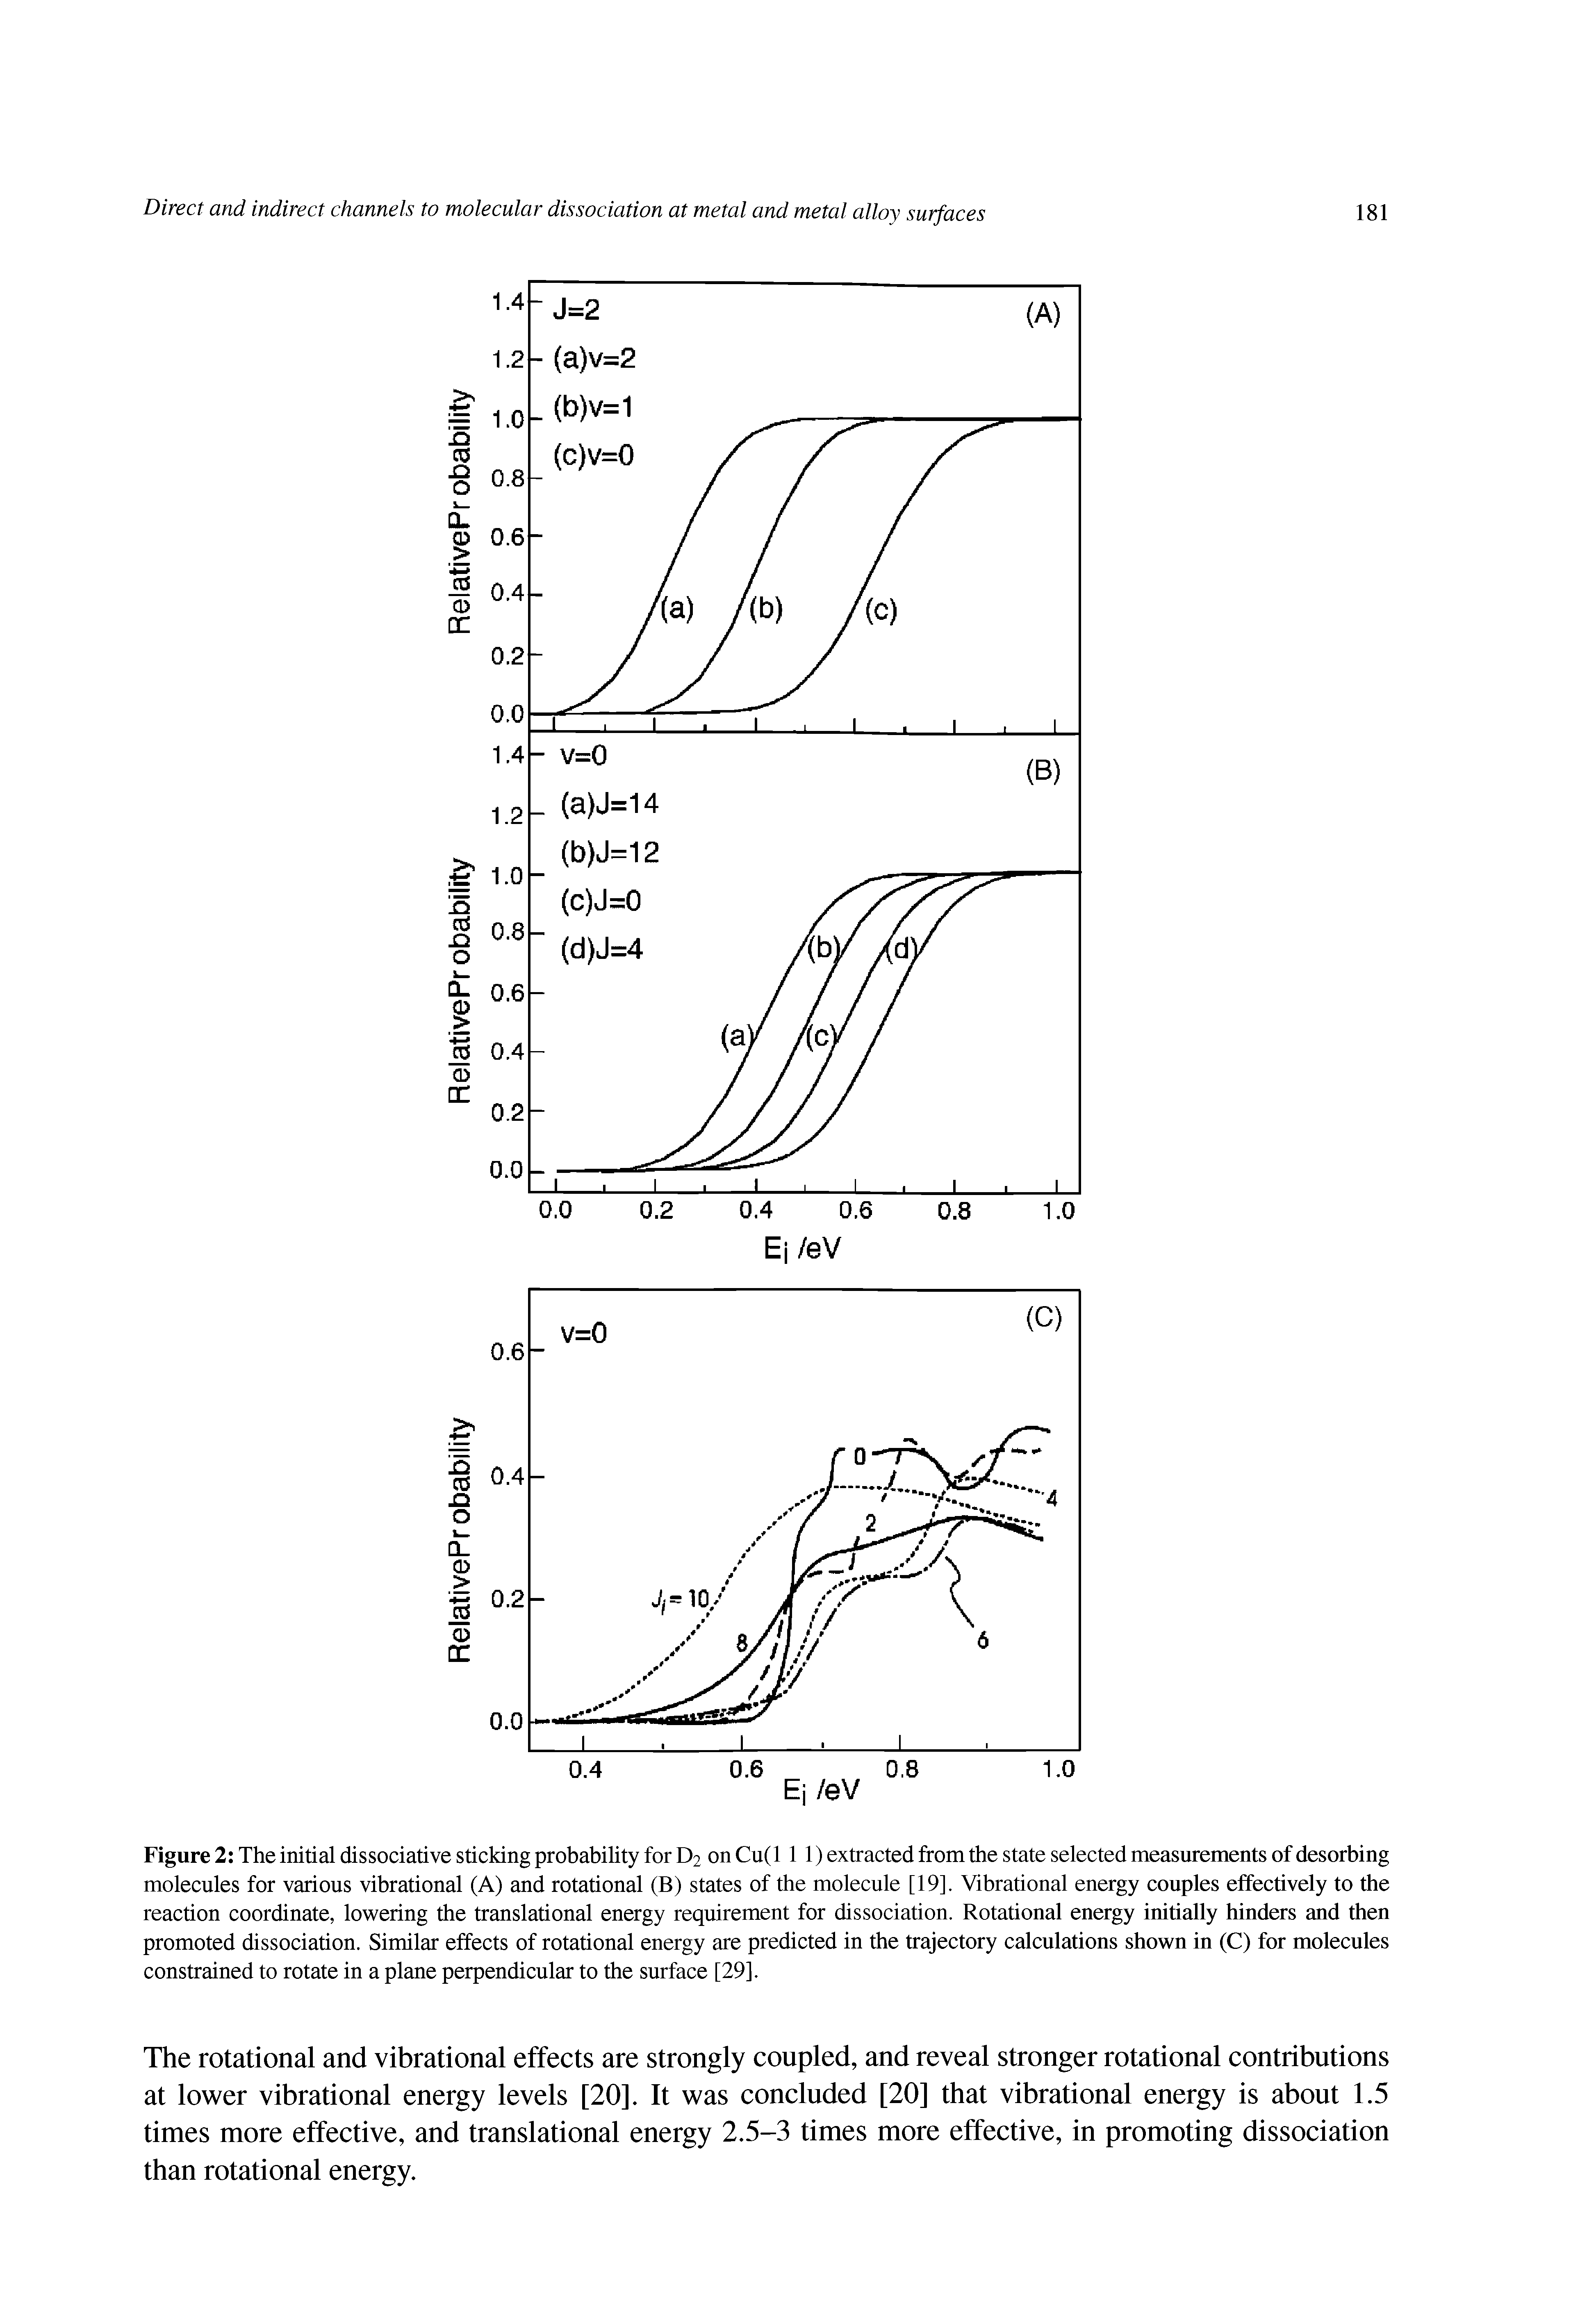 Figure 2 The initial dissociative sticking probability for D2 on Cu(l 1 1) extracted from the state selected measurements of desorbing molecules for various vibrational (A) and rotational (B) states of the molecule [19]. Vibrational energy couples effectively to the reaction coordinate, lowering the translational energy requirement for dissociation. Rotational energy initially hinders and then promoted dissociation. Similar effects of rotational energy are predicted in the trajectory calculations shown in (C) for molecules constrained to rotate in a plane perpendicular to the surface [29].